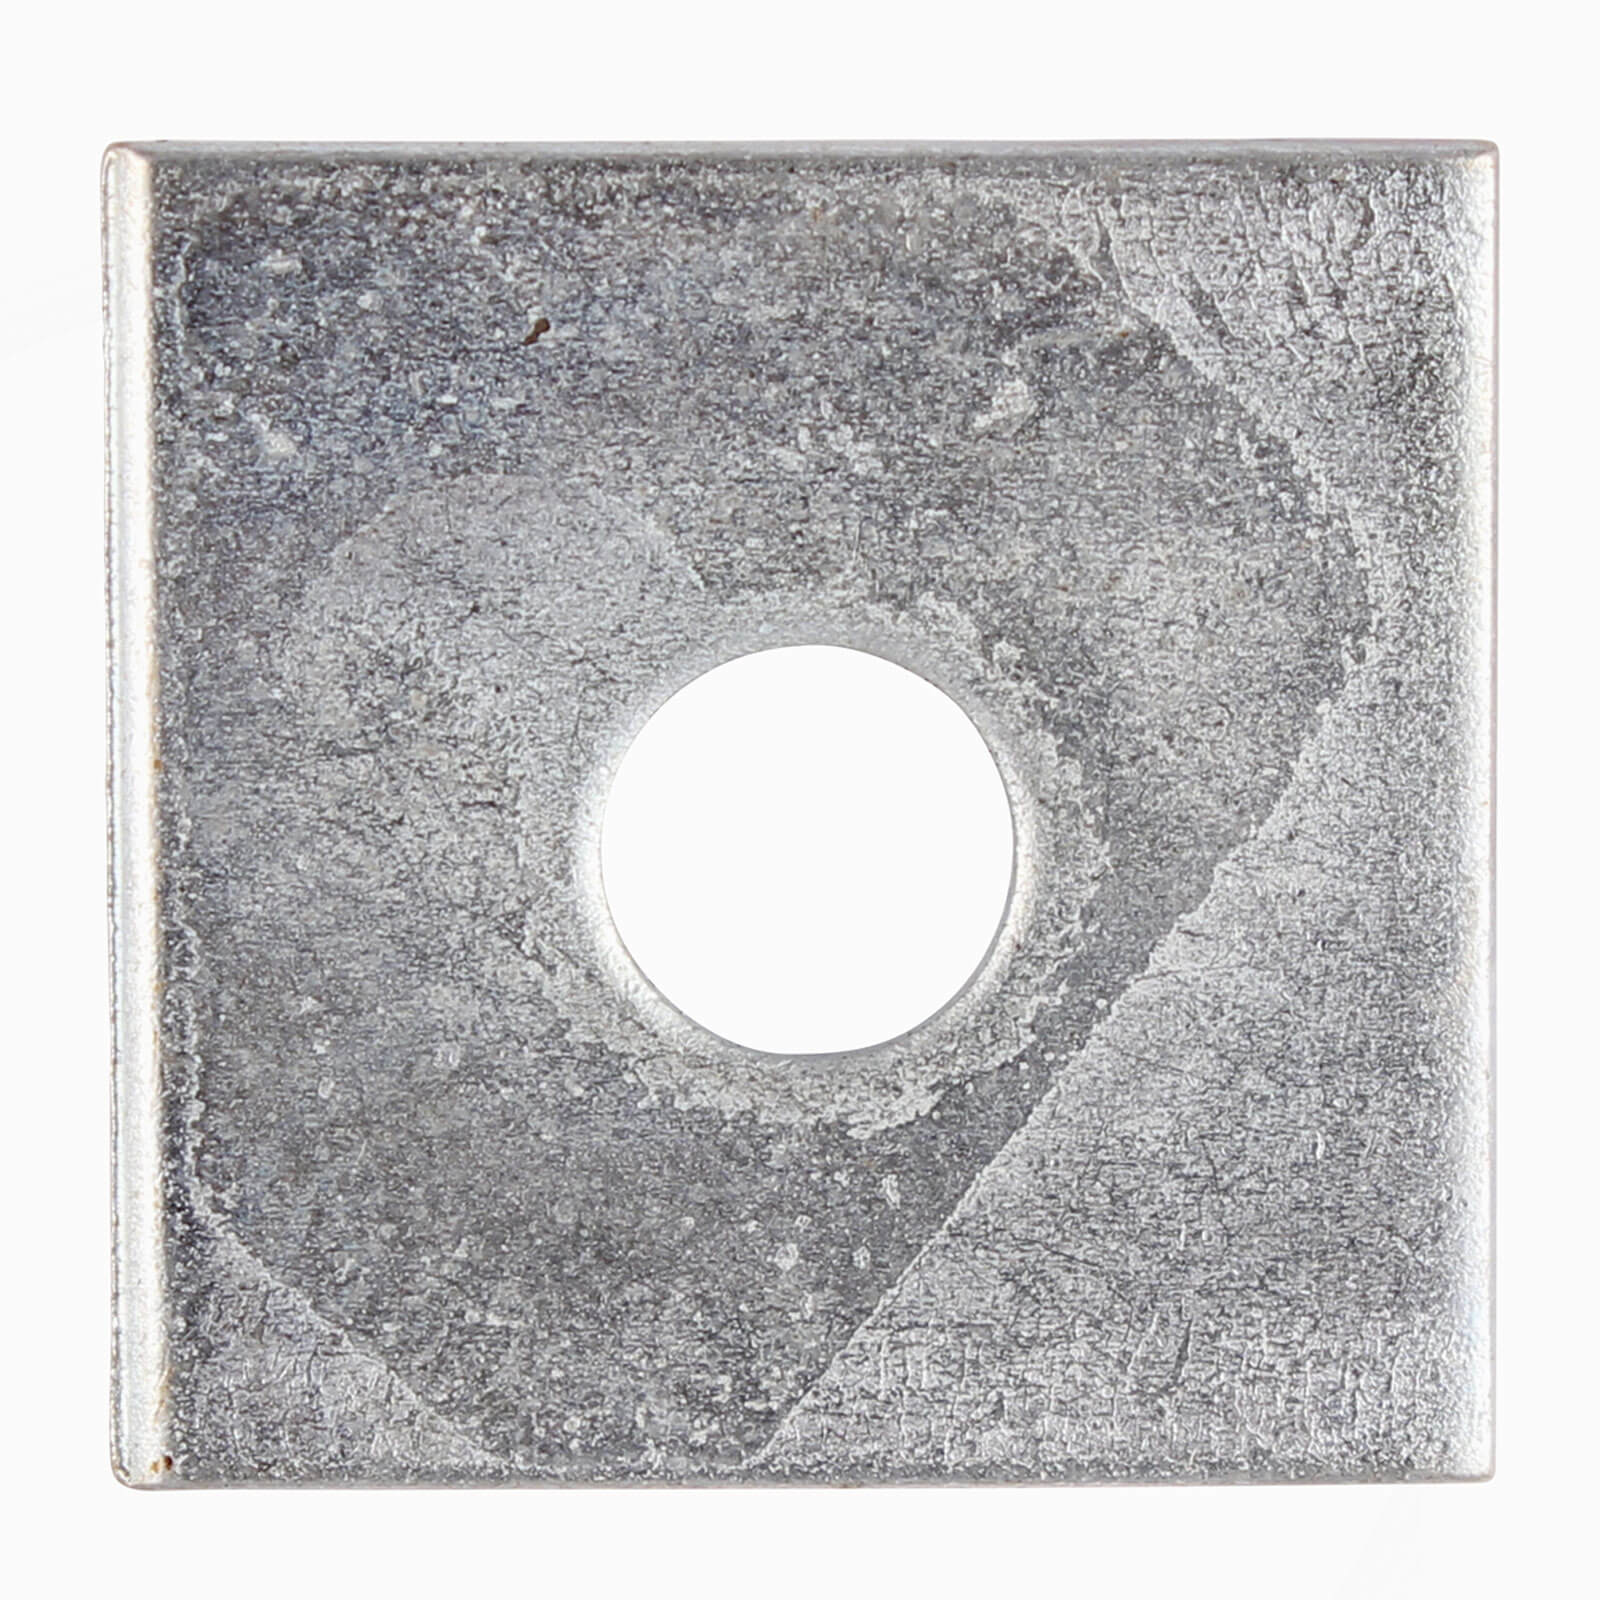 Image of Square Plate Washer Zinc Plated 12mm 50mm Pack of 30